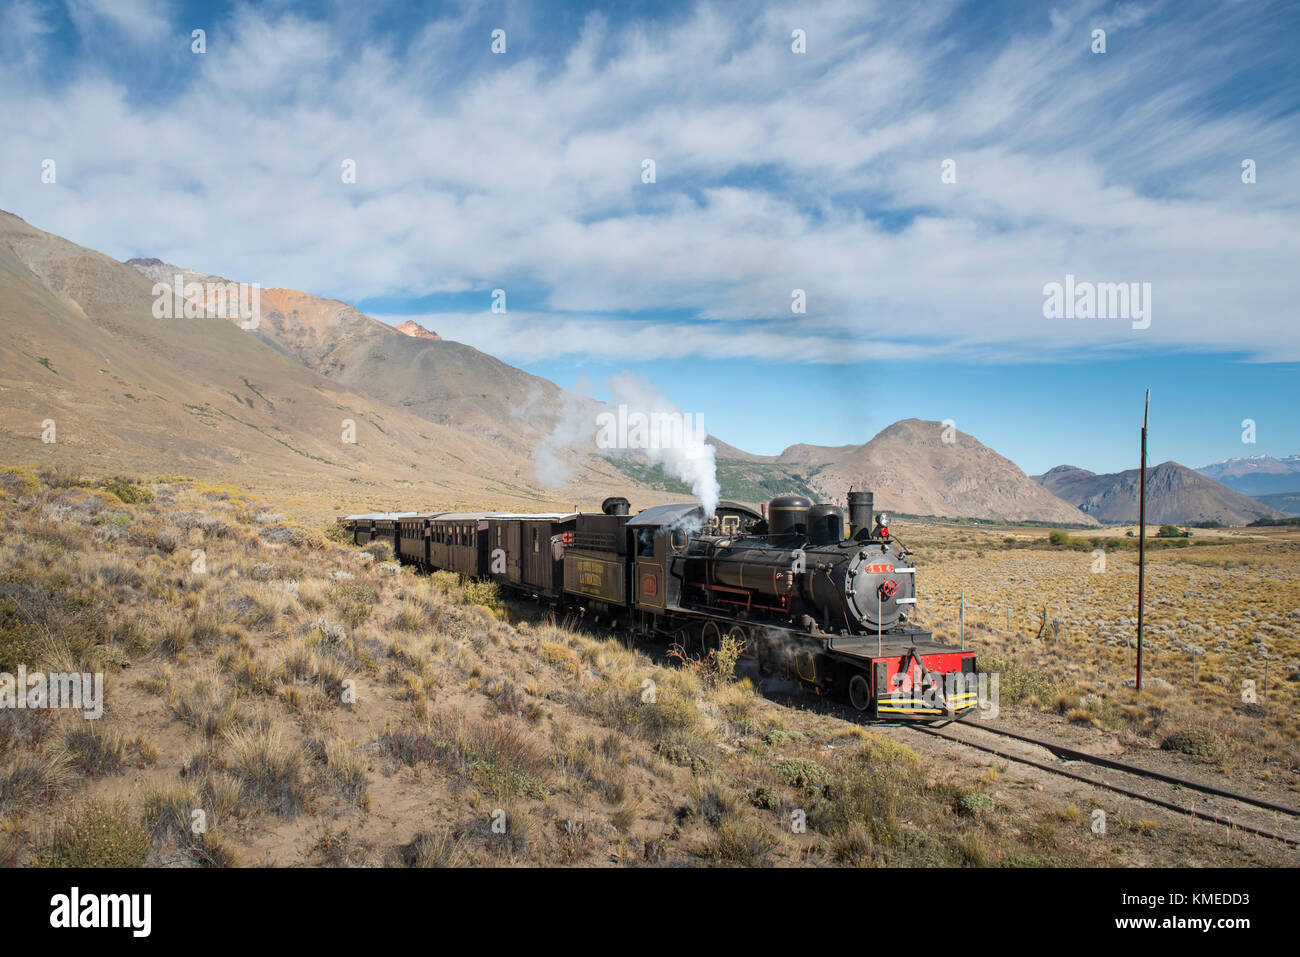 Clouds over train crossing Old Patagonian Express railway,Esquel,Chubut,Argentina Stock Photo